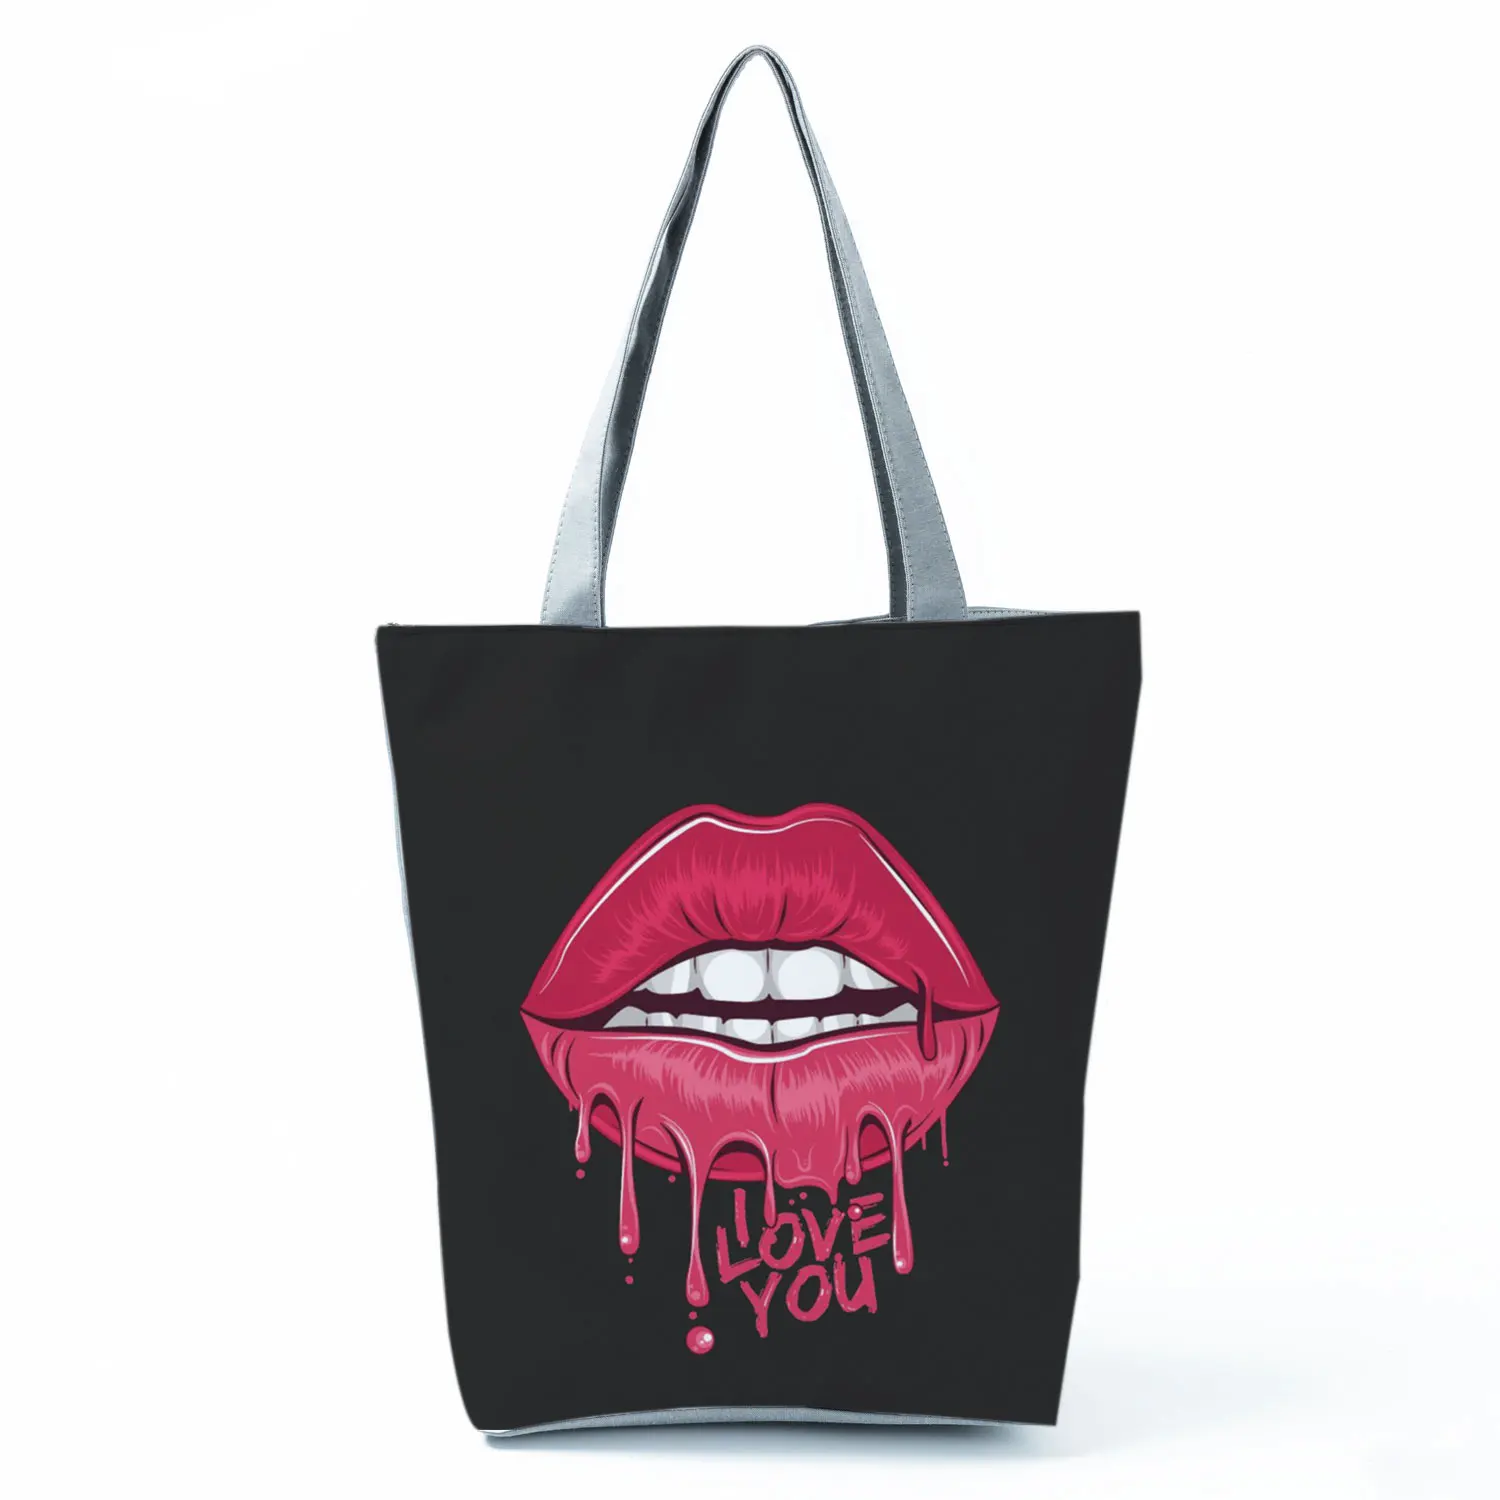 Handbags Lady Totes Shopping Bag Reusable Women Tote Bag Shoulder Work Bags Girls Black Kiss Leopard Lips Graphic Bags New Funny purse Totes